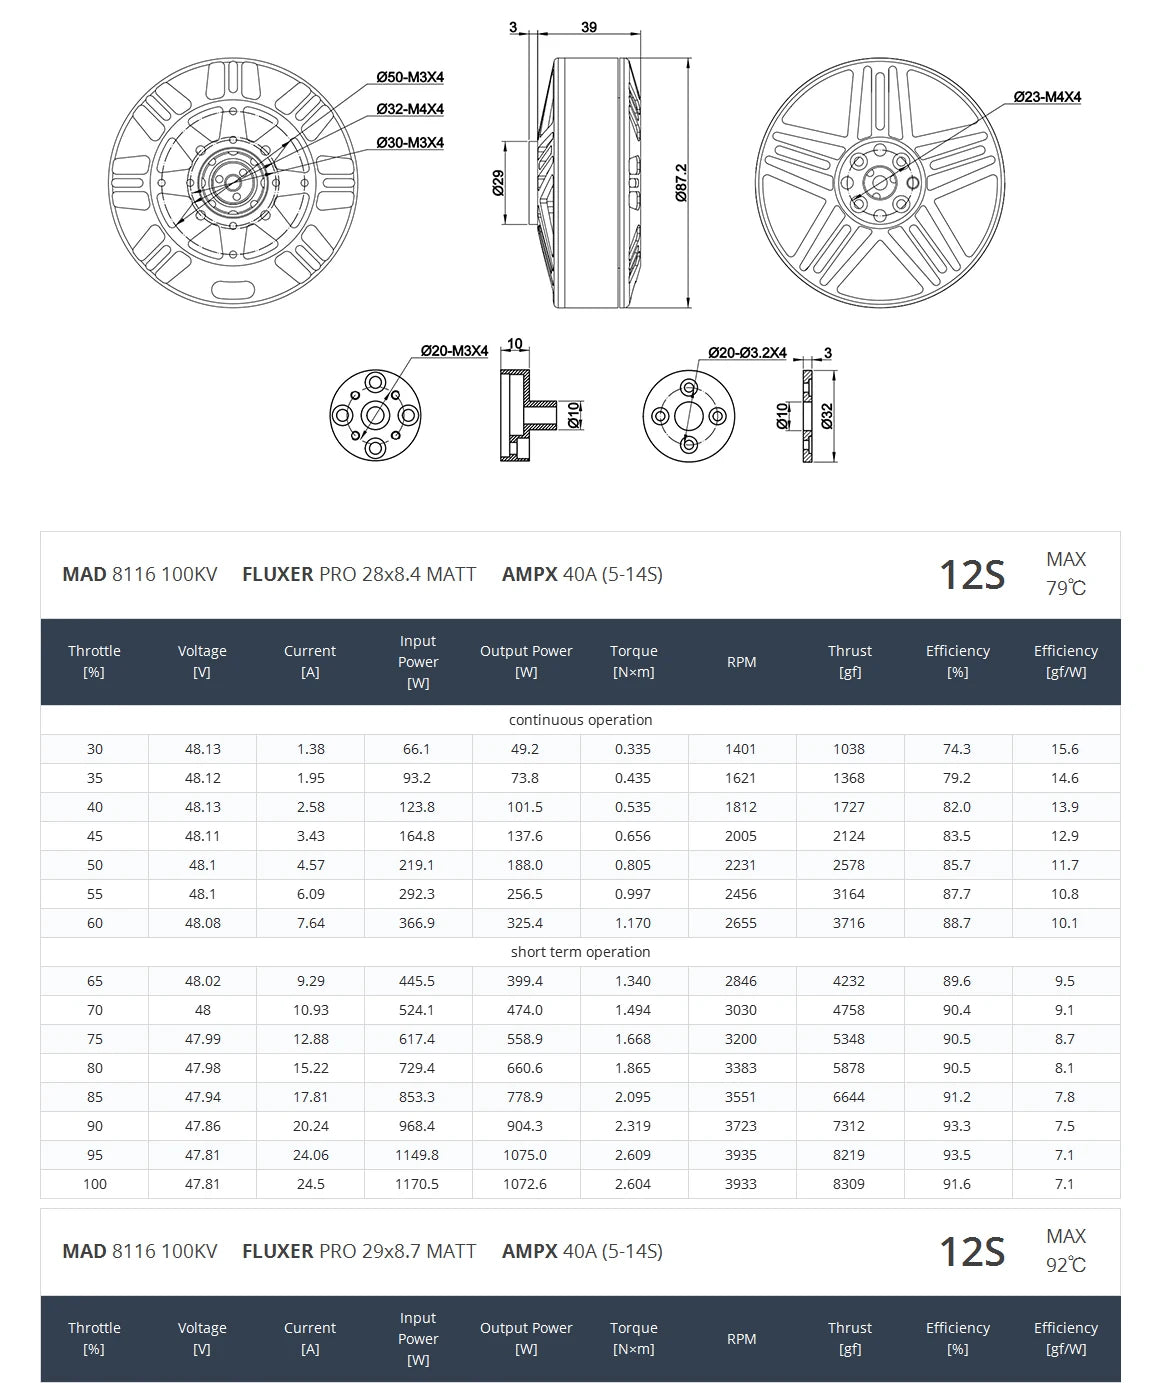 MAD 8116 EEE Agriculture Drone Motor, Multi-rotor brushless motor for agricultural & aerial photography applications with heavy load capacity and high performance.